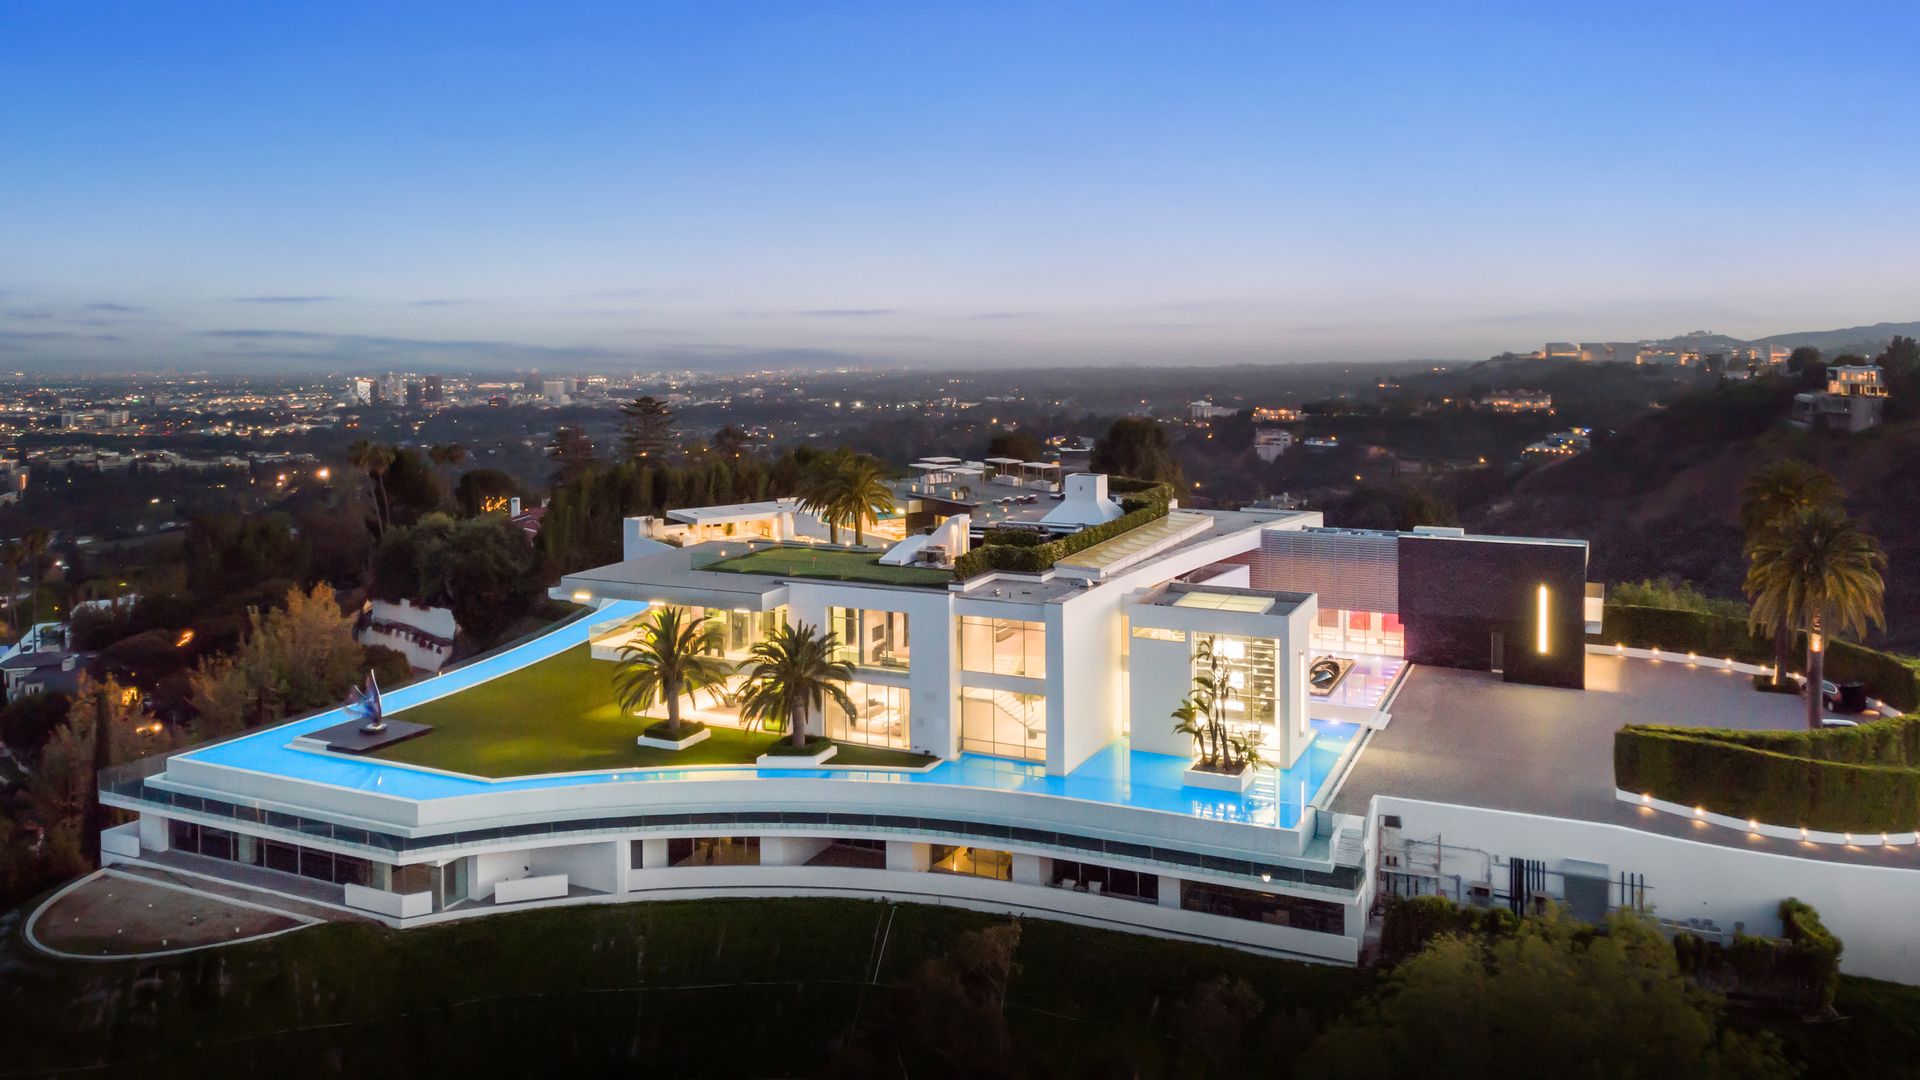 Inside The One – 'America's most expensive home'